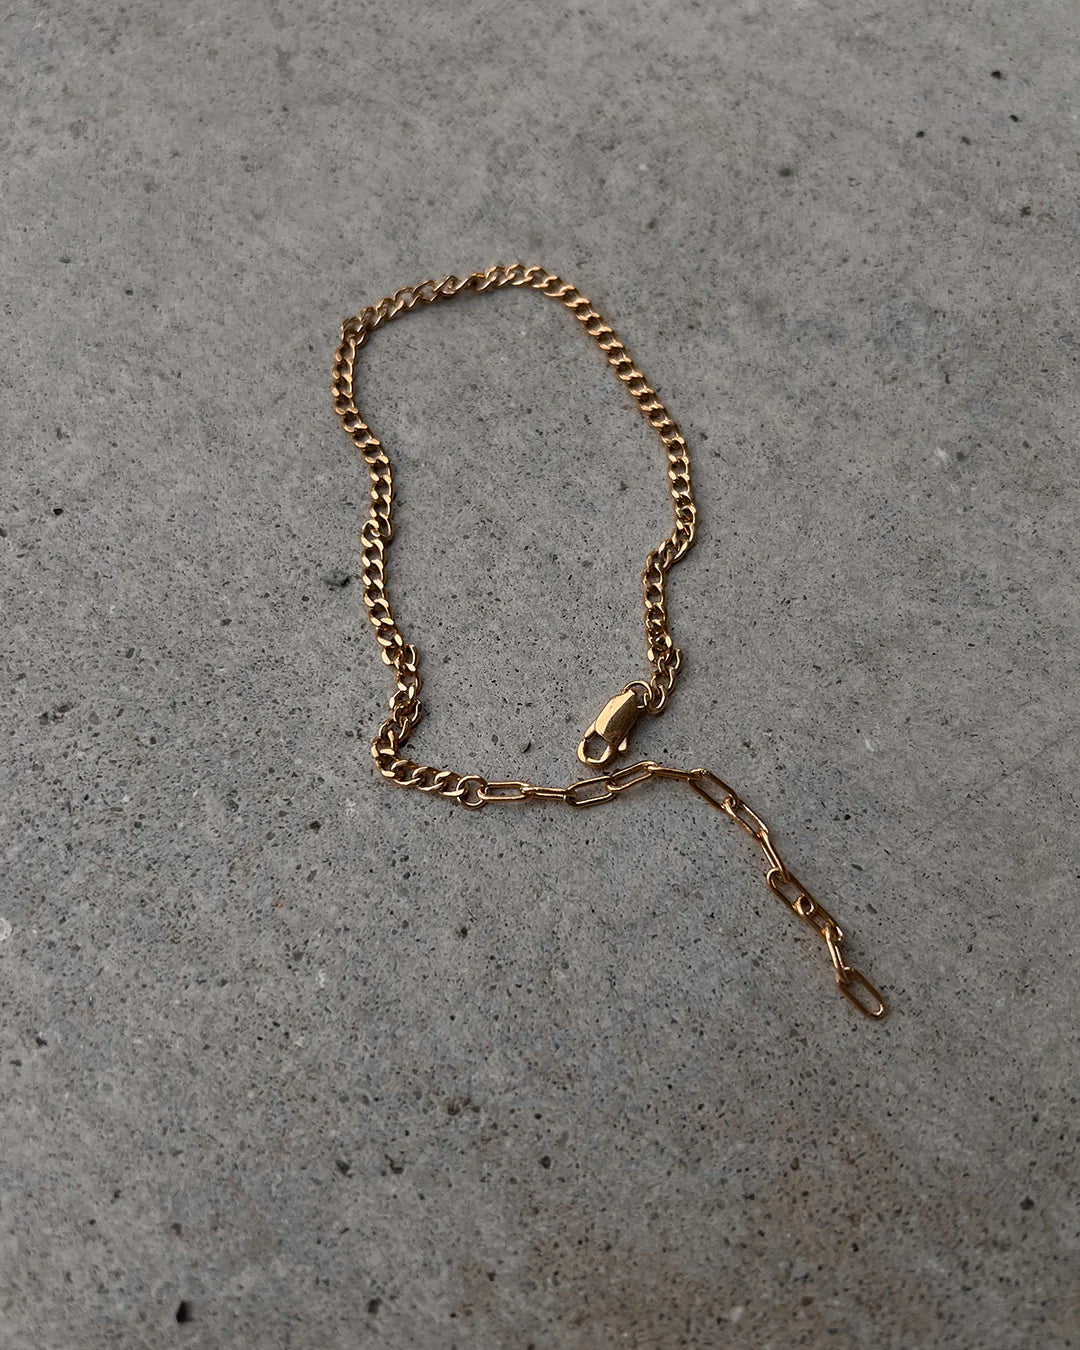 Virgo Energy Anklet in Gold - Madison's Niche 